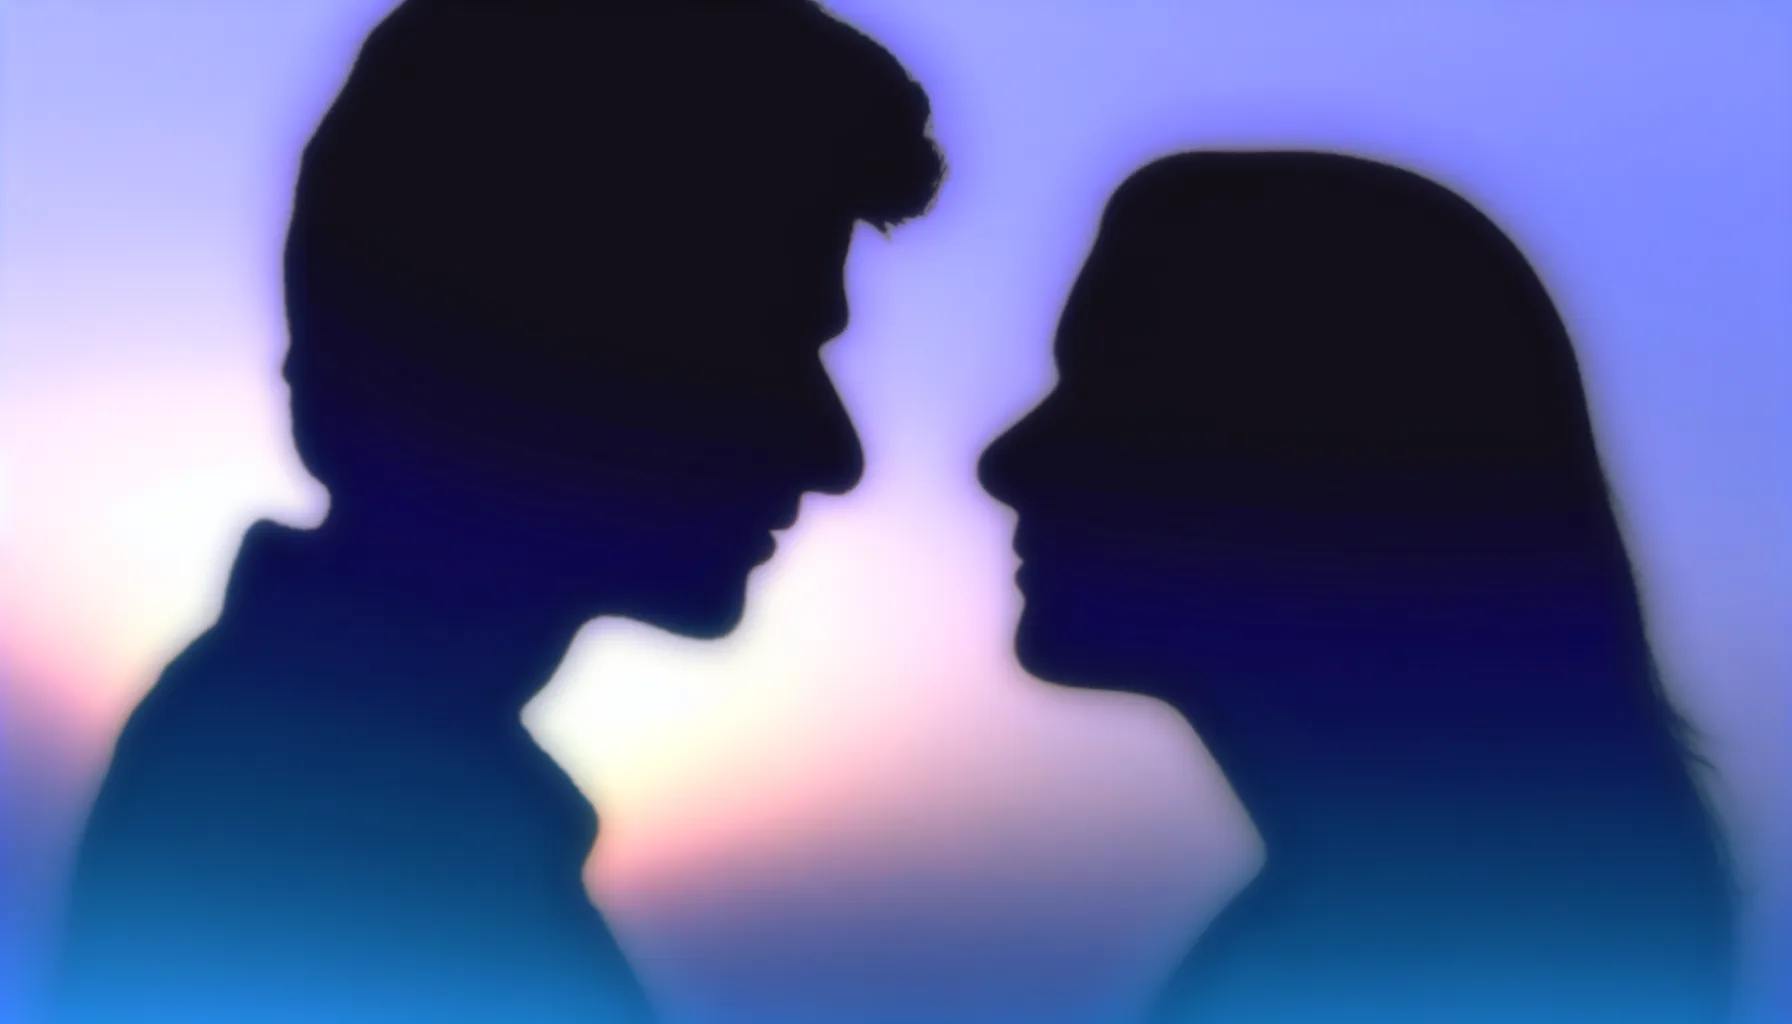 <strong>A Whisper of Intimacy:</strong> Like shadows at dusk, their connection suggests a closeness that teeters on the edge of becoming tangible, embodying the silent language of hearts in unofficial dating.